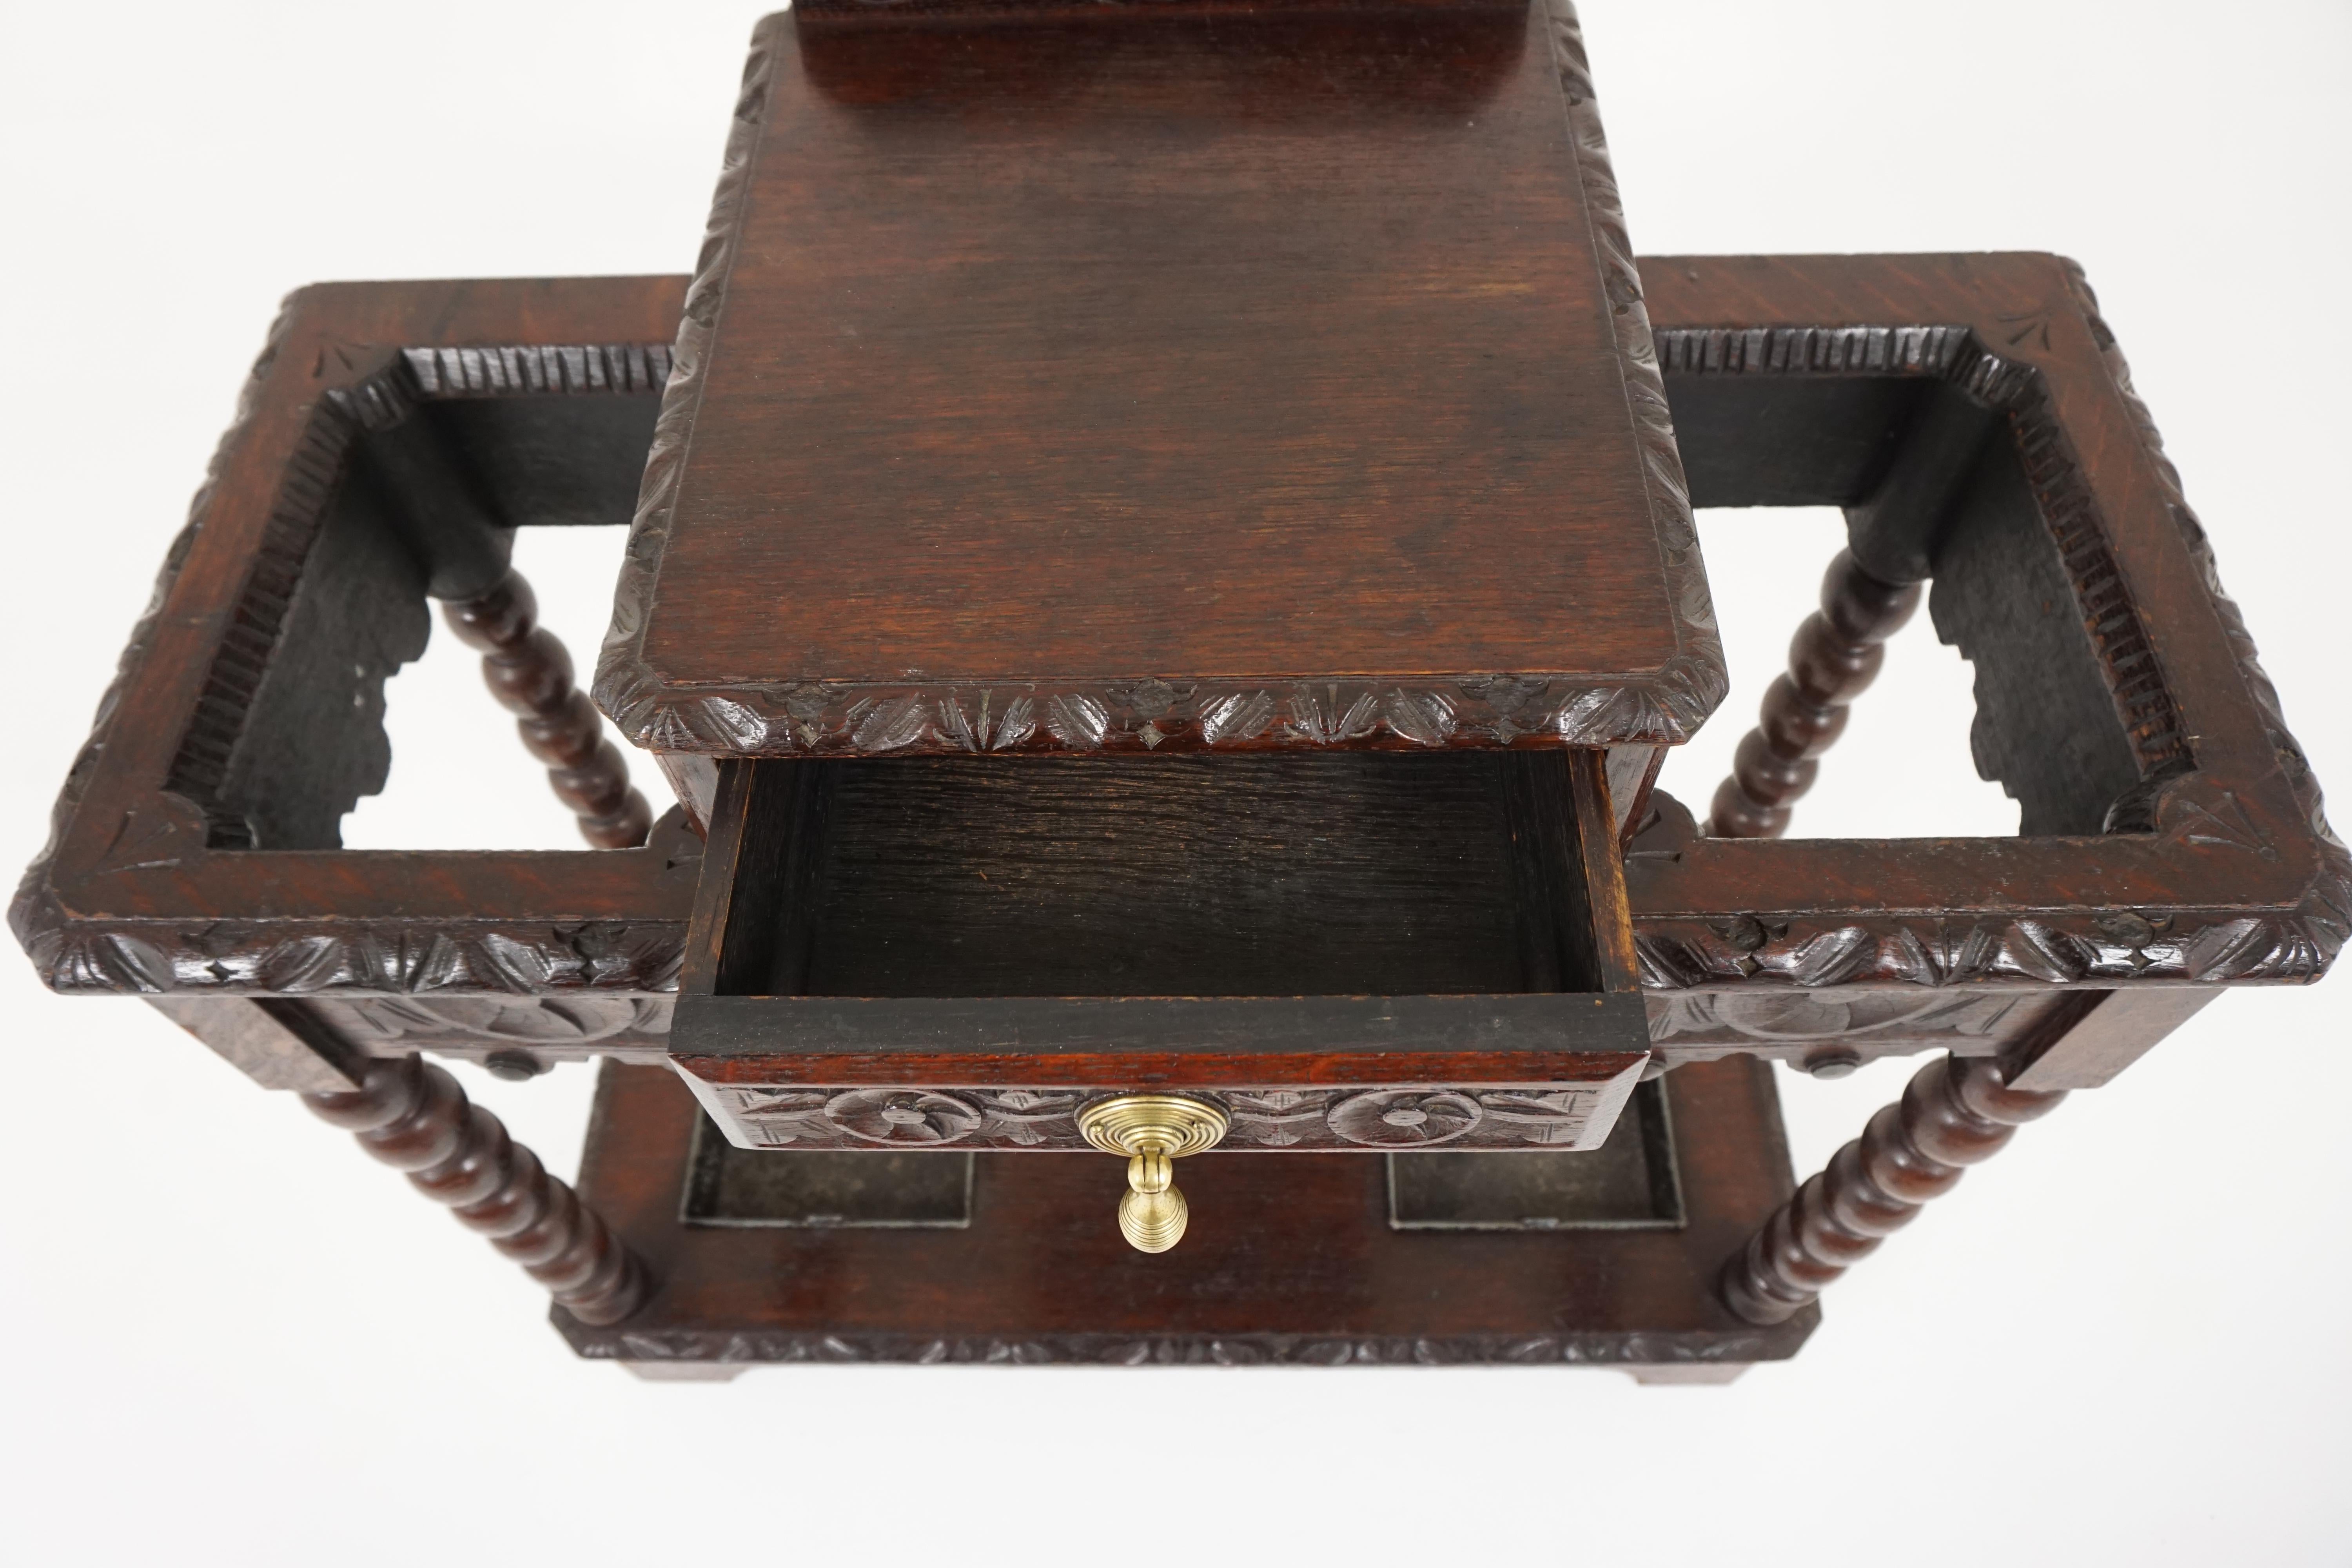 Antique stick stand, carved tiger oak umbrella hall stand, antique furniture, Scotland 1880, B1800

Scotland, 1880
Solid oak
Original finish
Small carved back
Rectangular top with carved edge
Over a carved drawer with the original brass